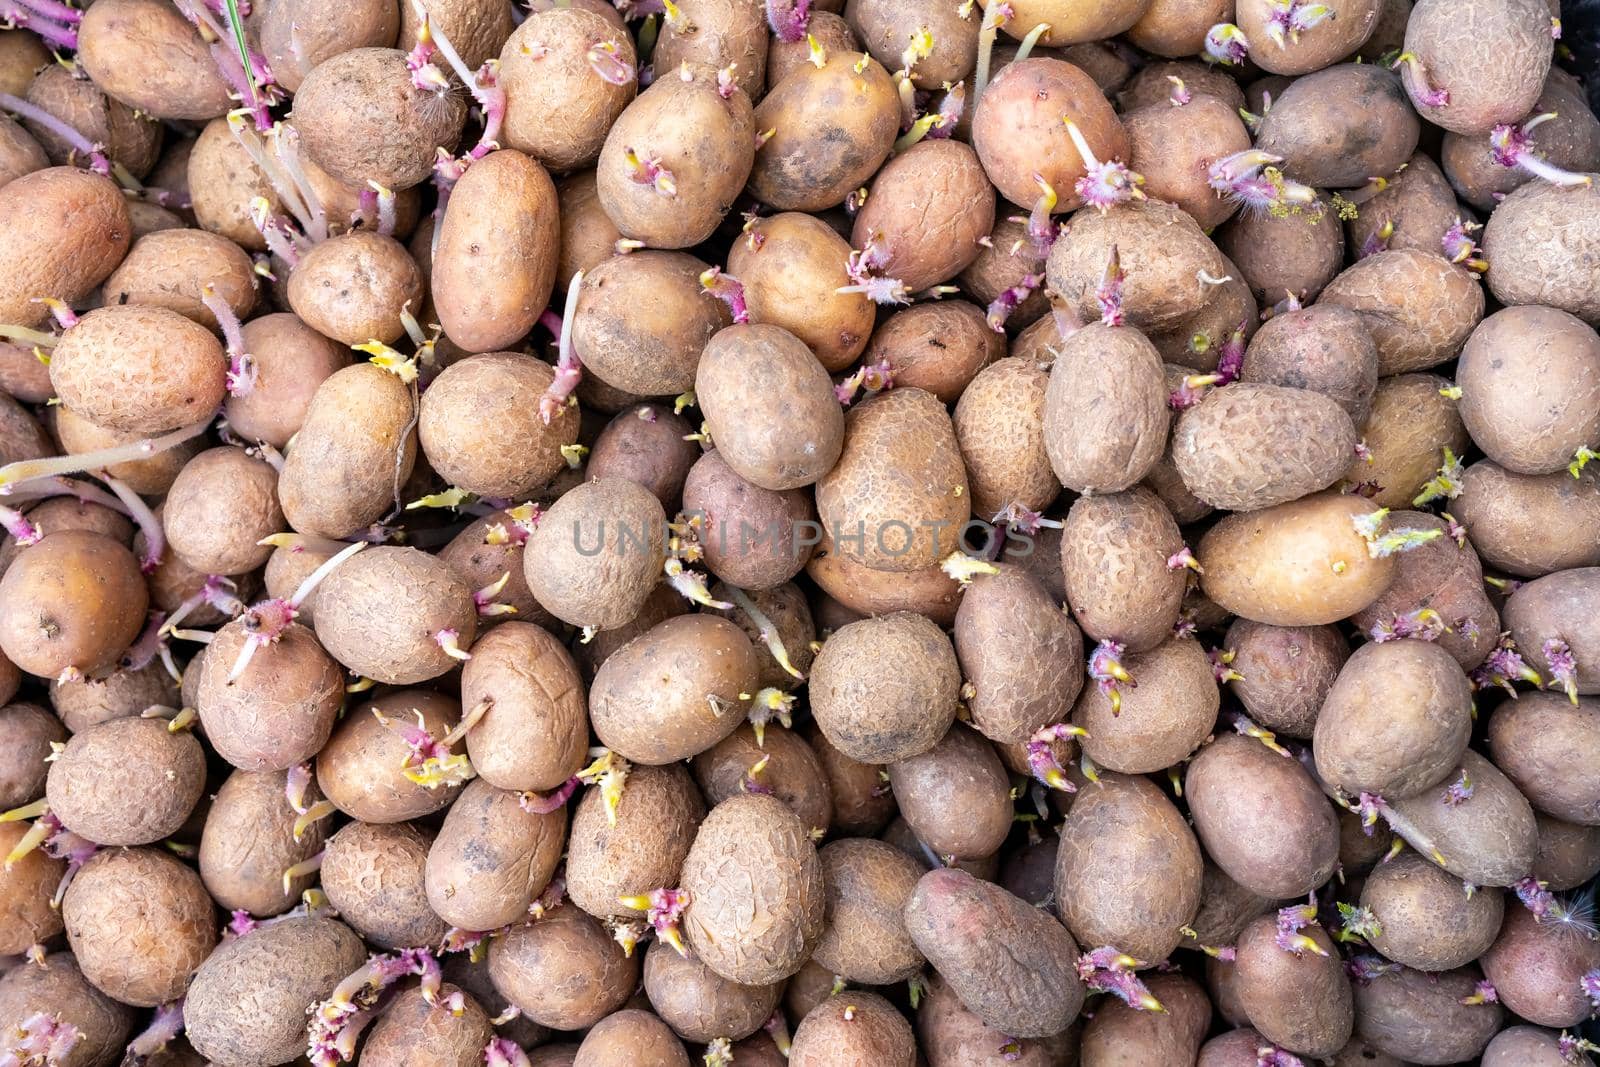 Many potatoes with young shoots are prepared for planting.